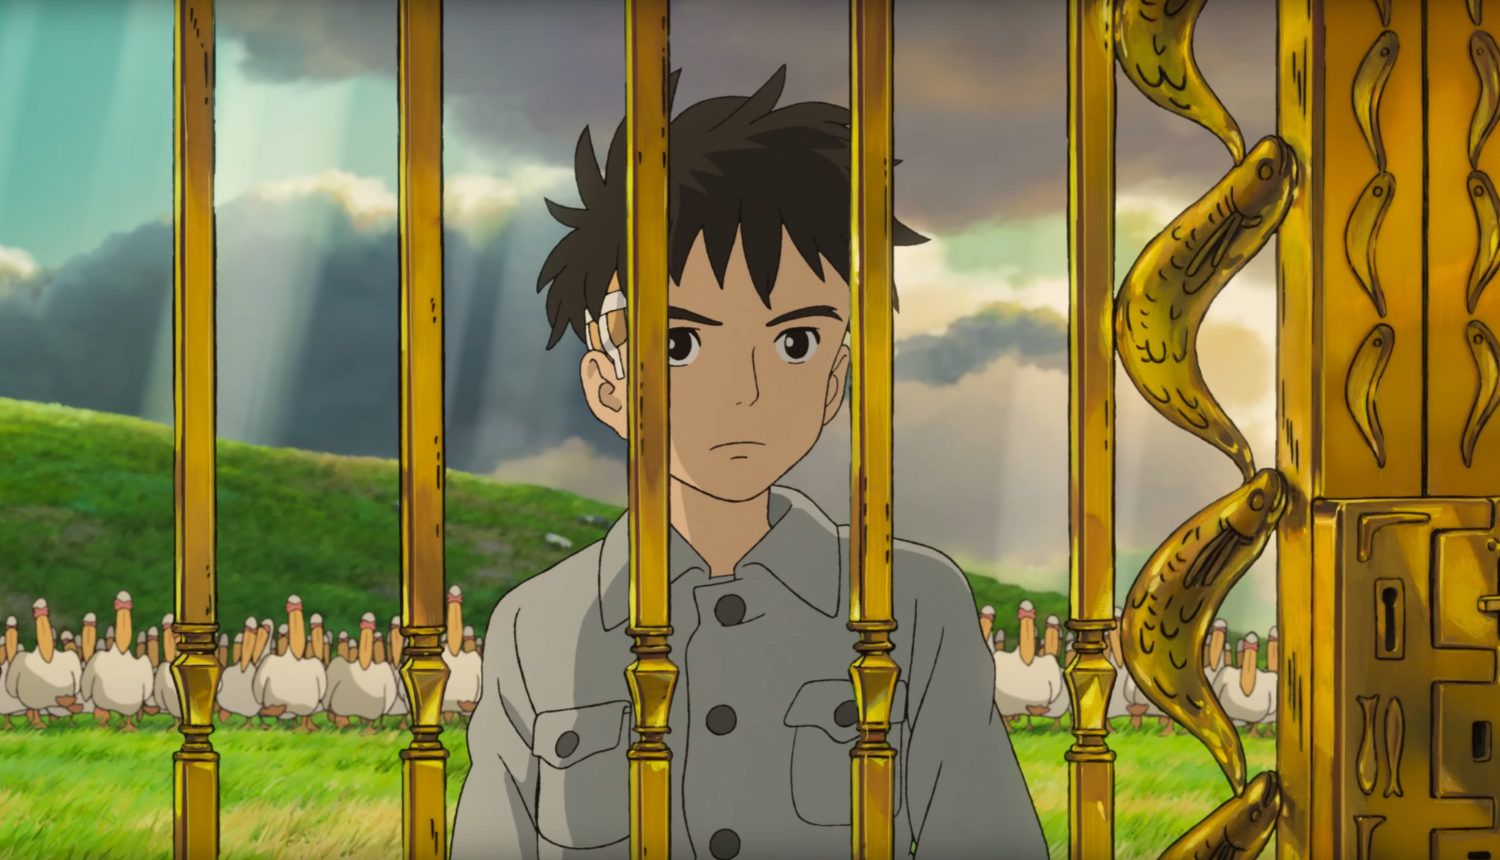 The Boy and the Heron - GKIDS Films